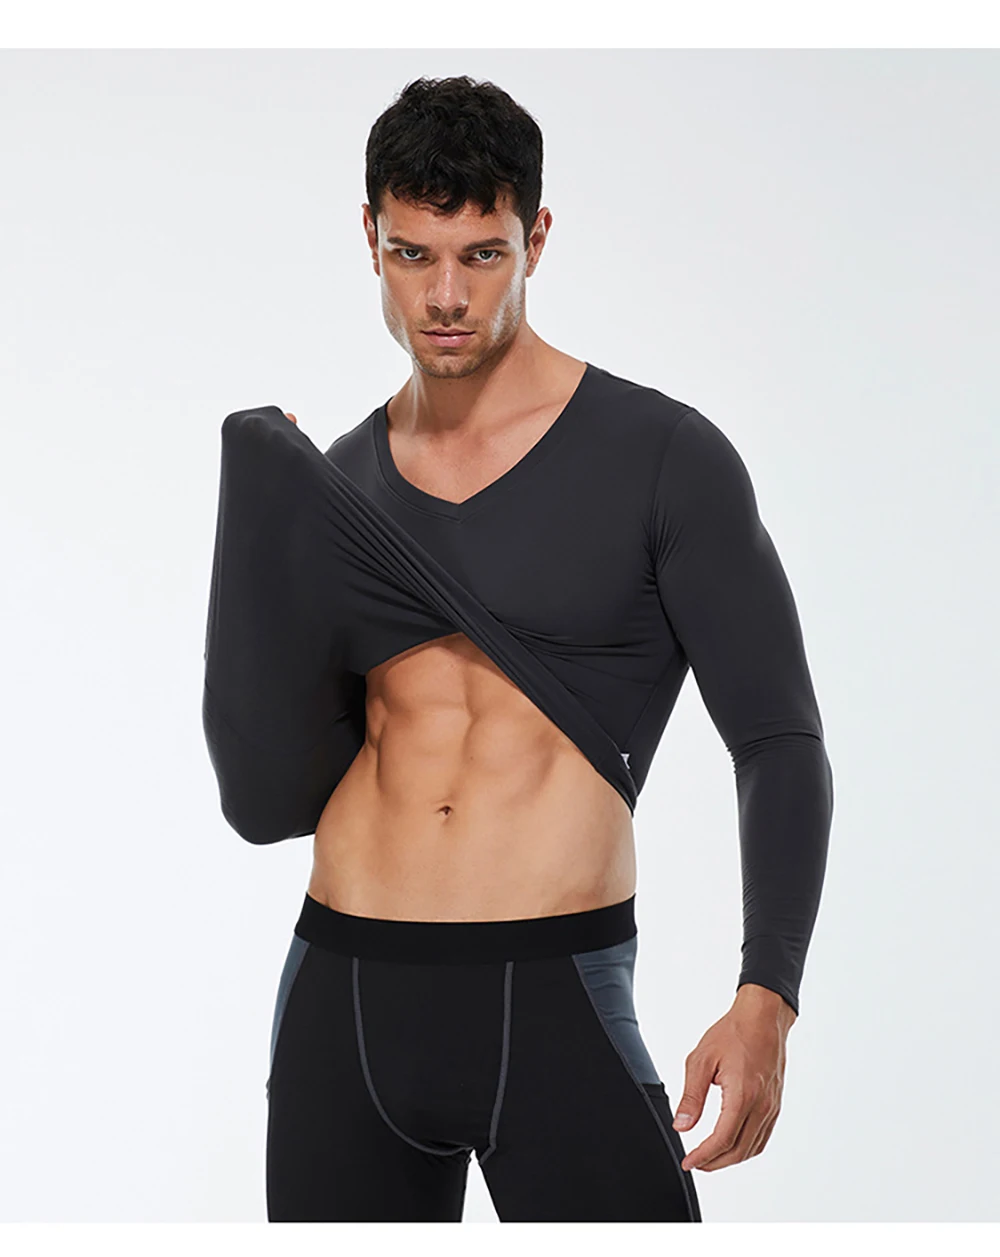 thermal long johns Fanceey Men Thermal Underwear Warm Long Johns For Male Winter Thermo Underwear Sets Compression Clothes Men Ski Sportswear mens long underwear